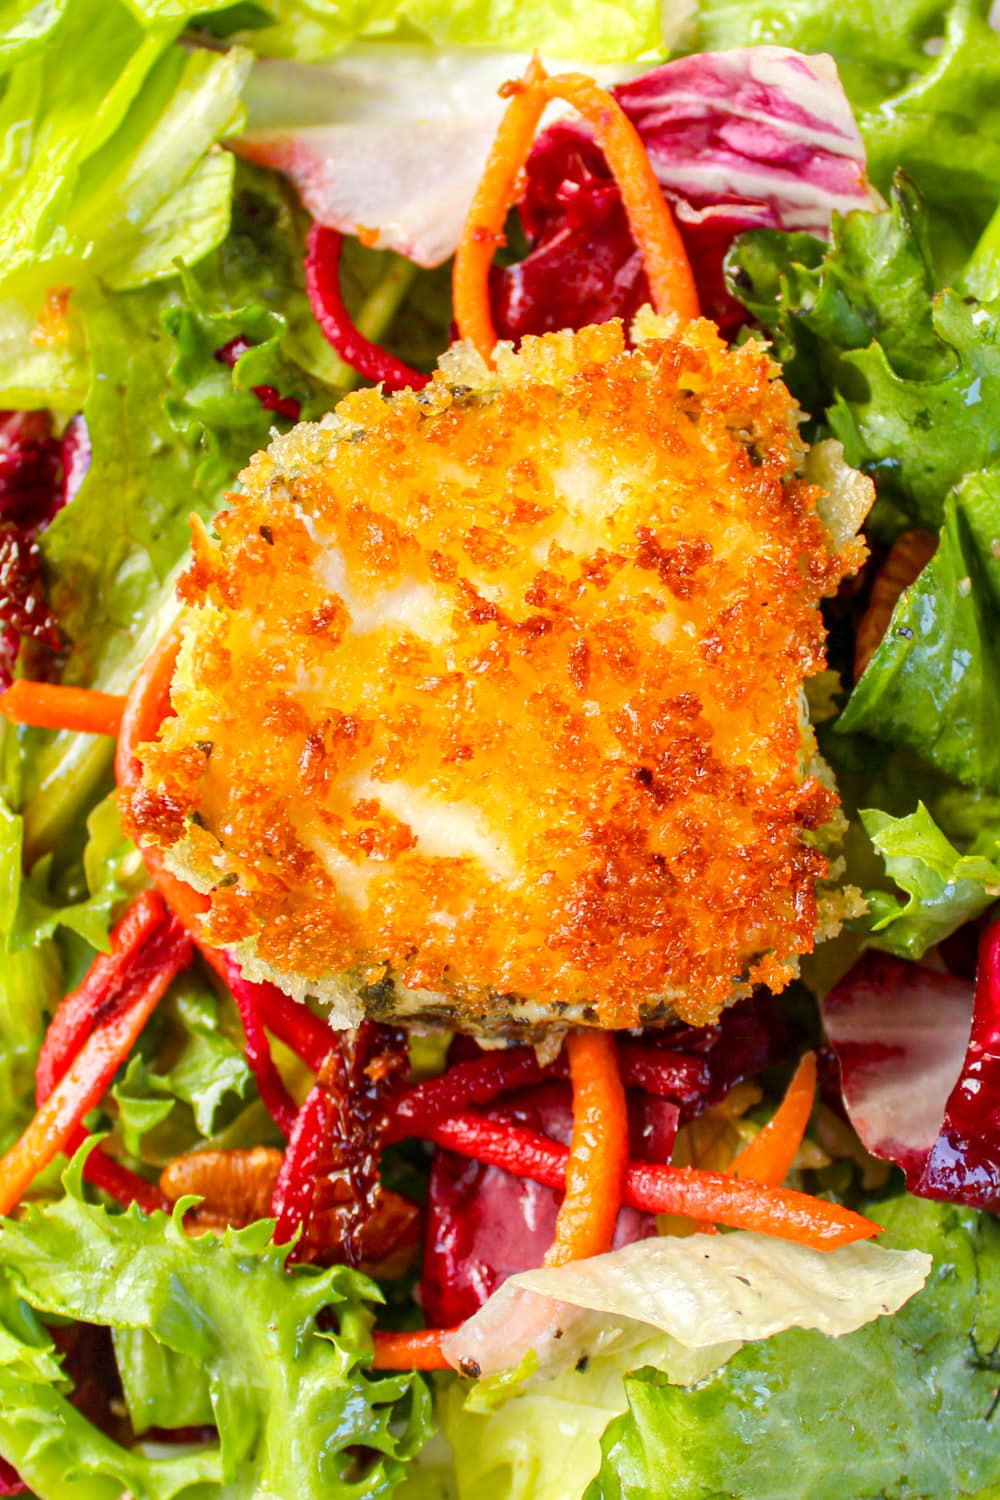 fried crusted goat cheese round on dressed.